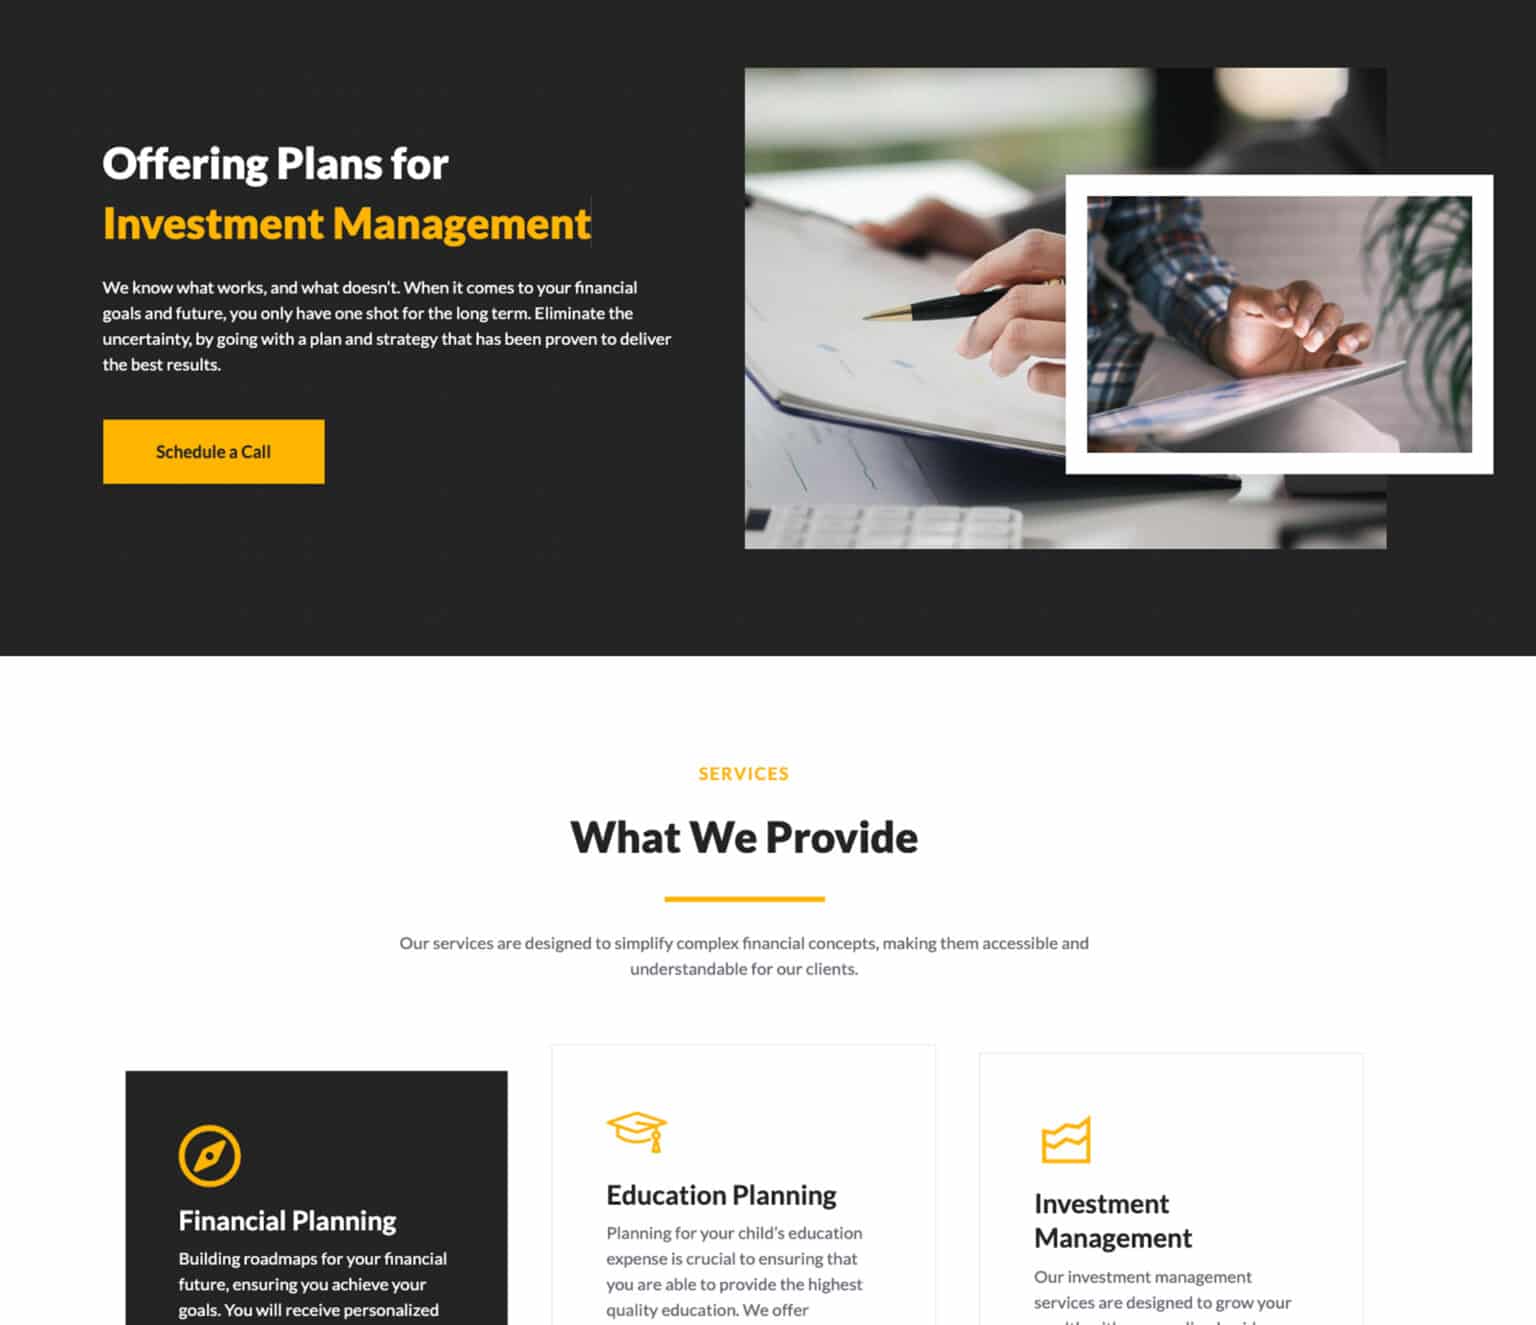 A website showing investment management services.